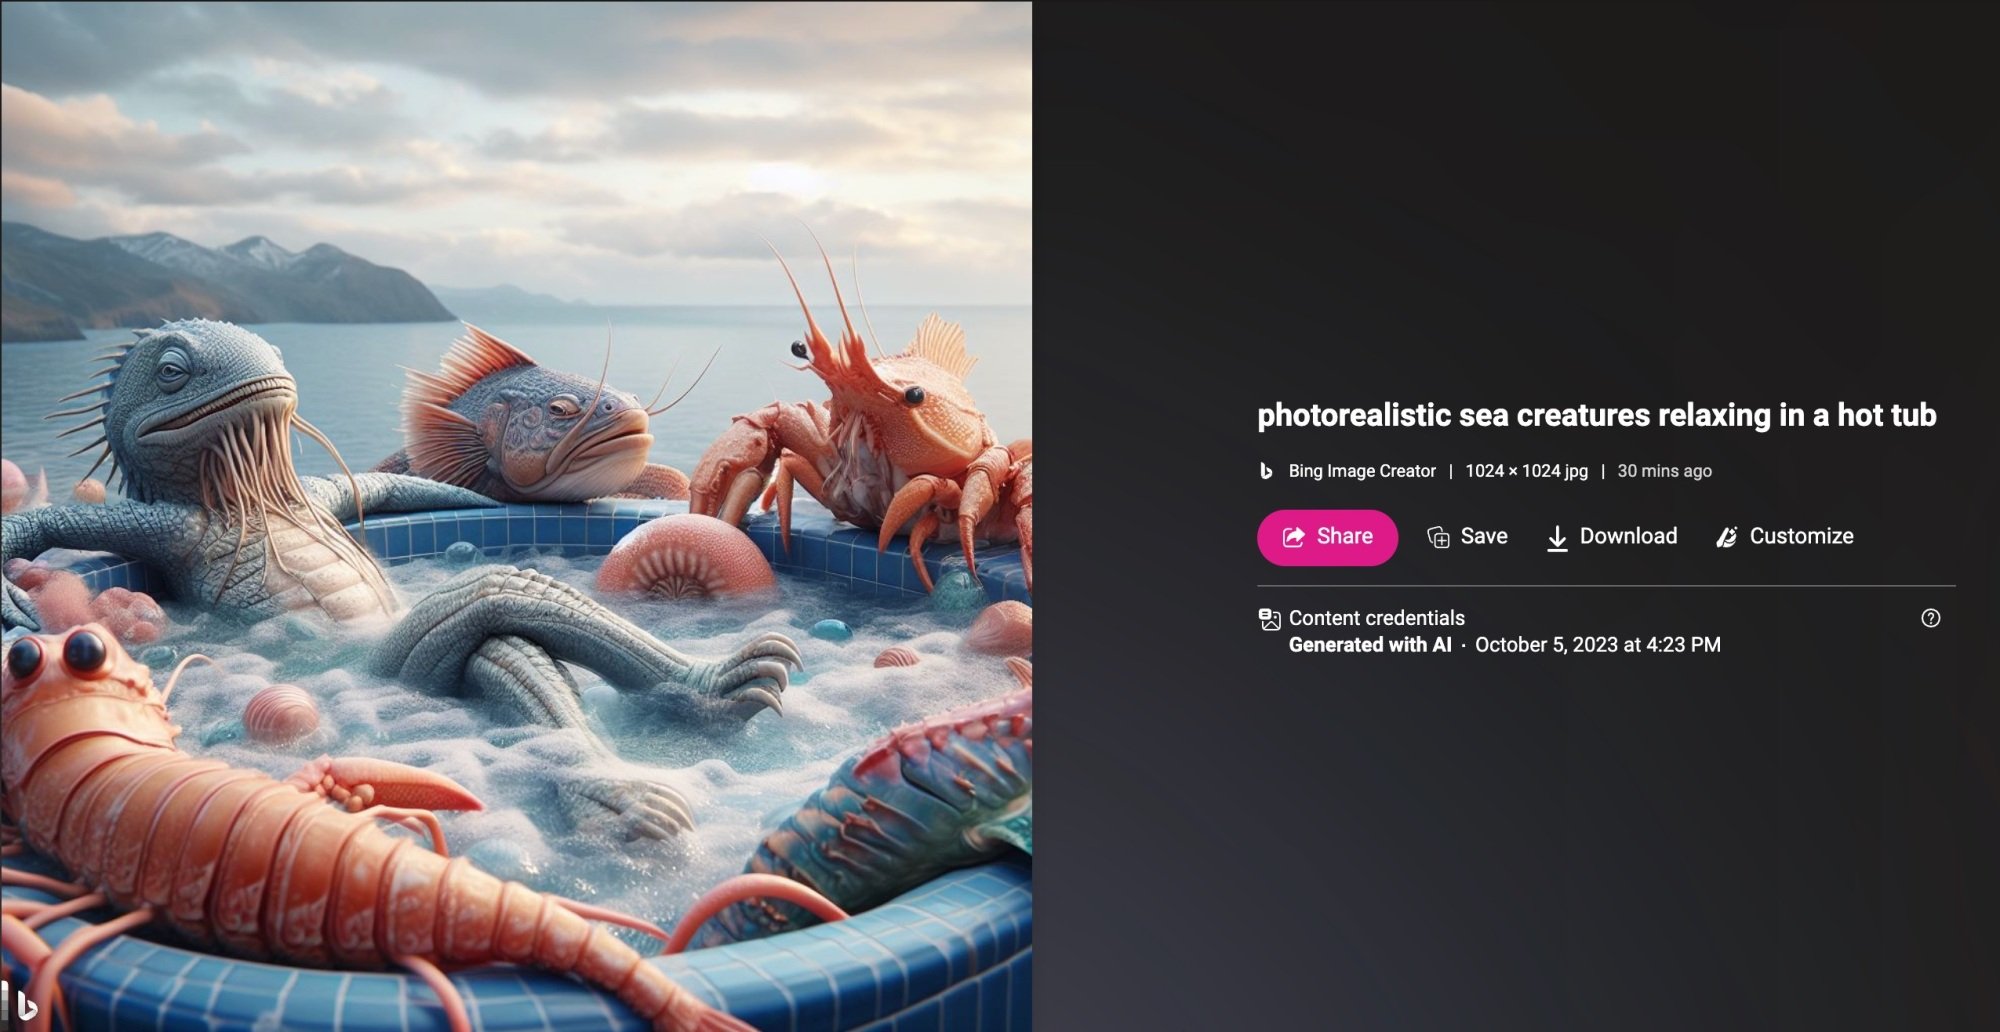 Bing Image Creator AI-generated image of sea creatures relaxing in a hot tub